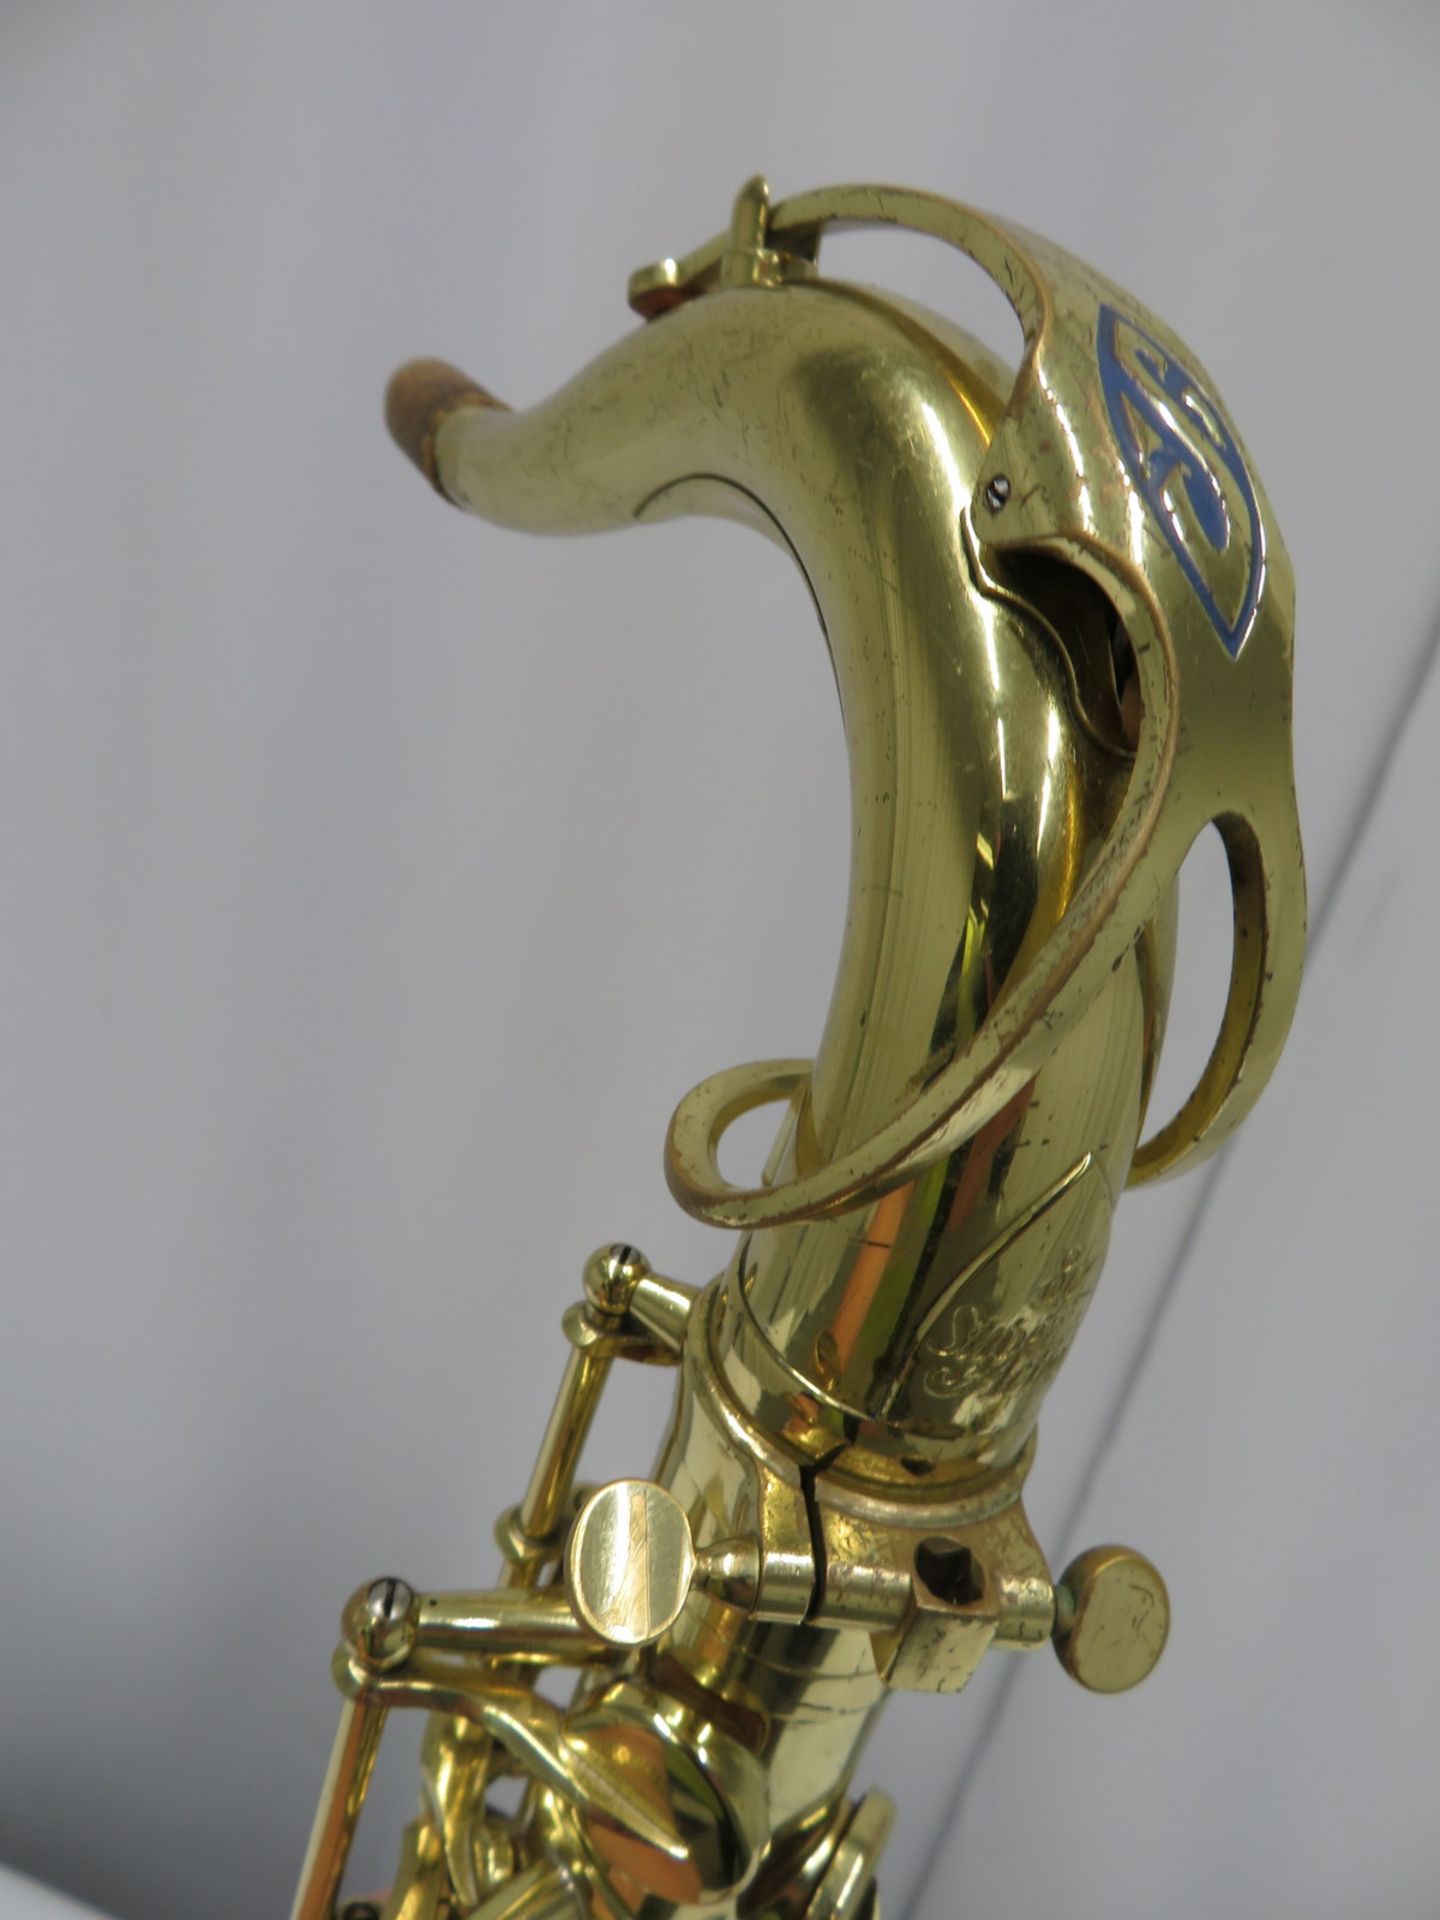 Henri Selmer 80 super action series 2 tenor saxophone with case. Serial number: N.613456. - Image 16 of 17